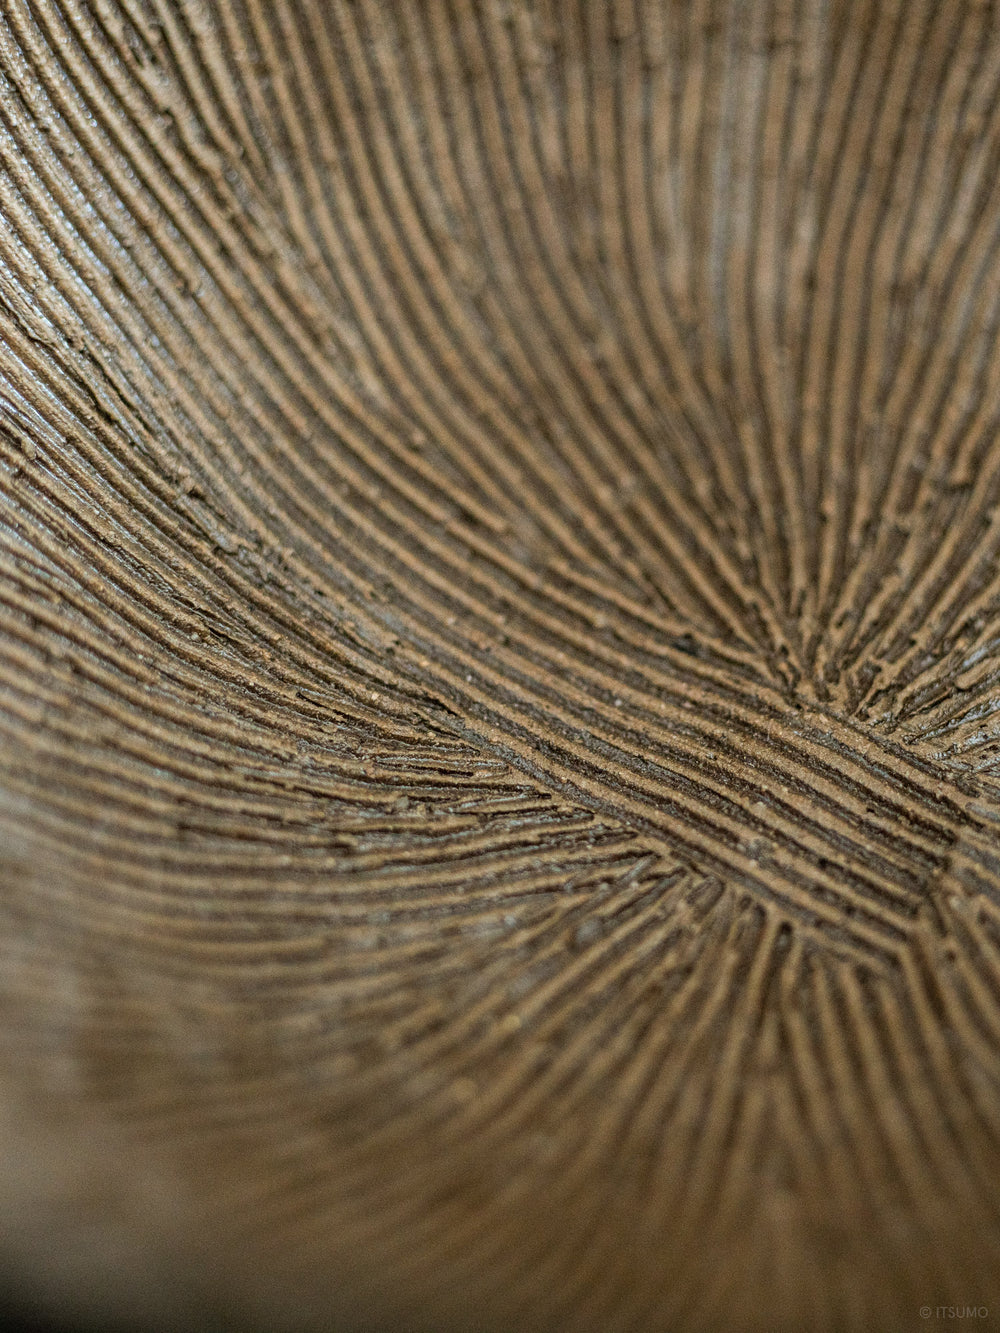 Close up detail of the inside of iga suribachi mortar showing textured lines in ceramic clay